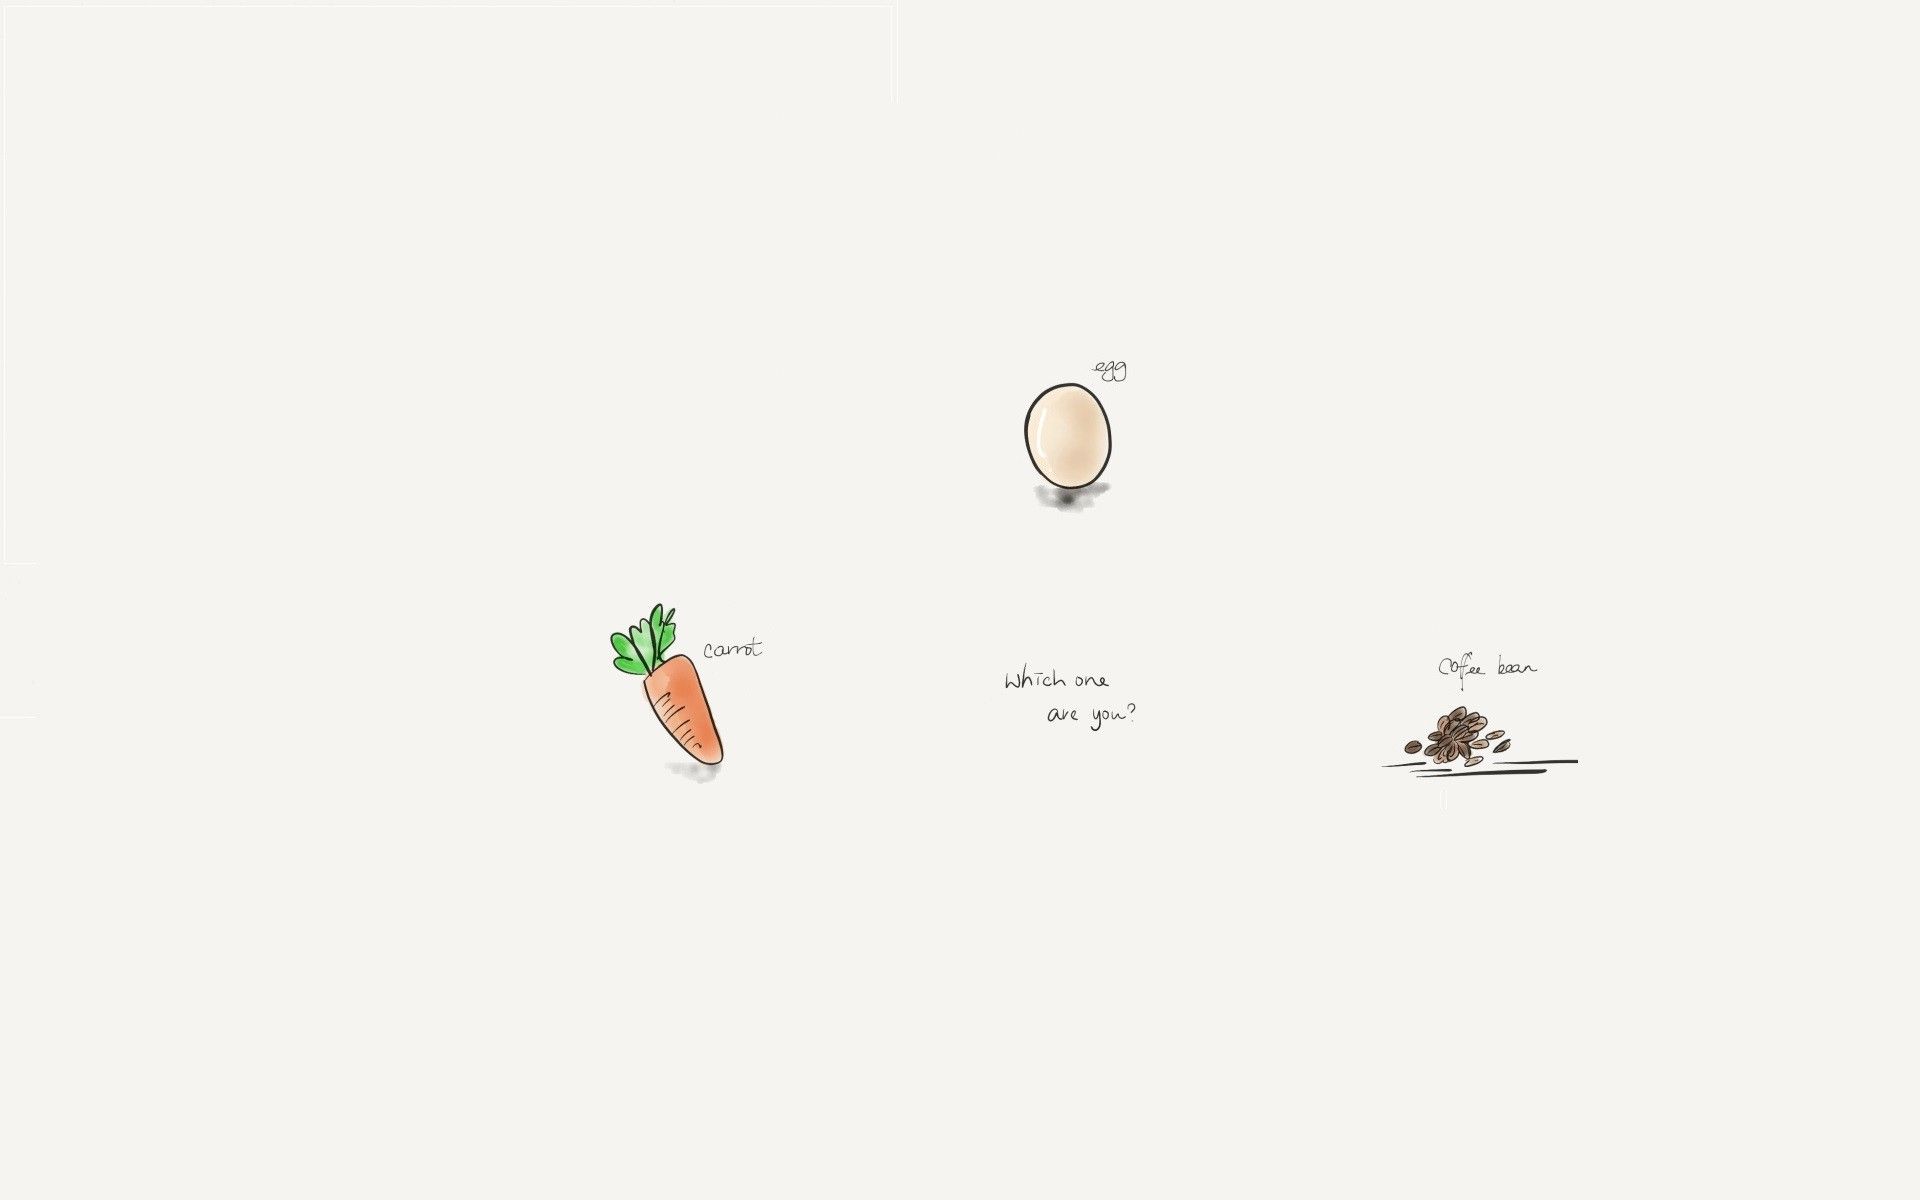 Perseverance story: What Are You. a carrot, egg or coffee?